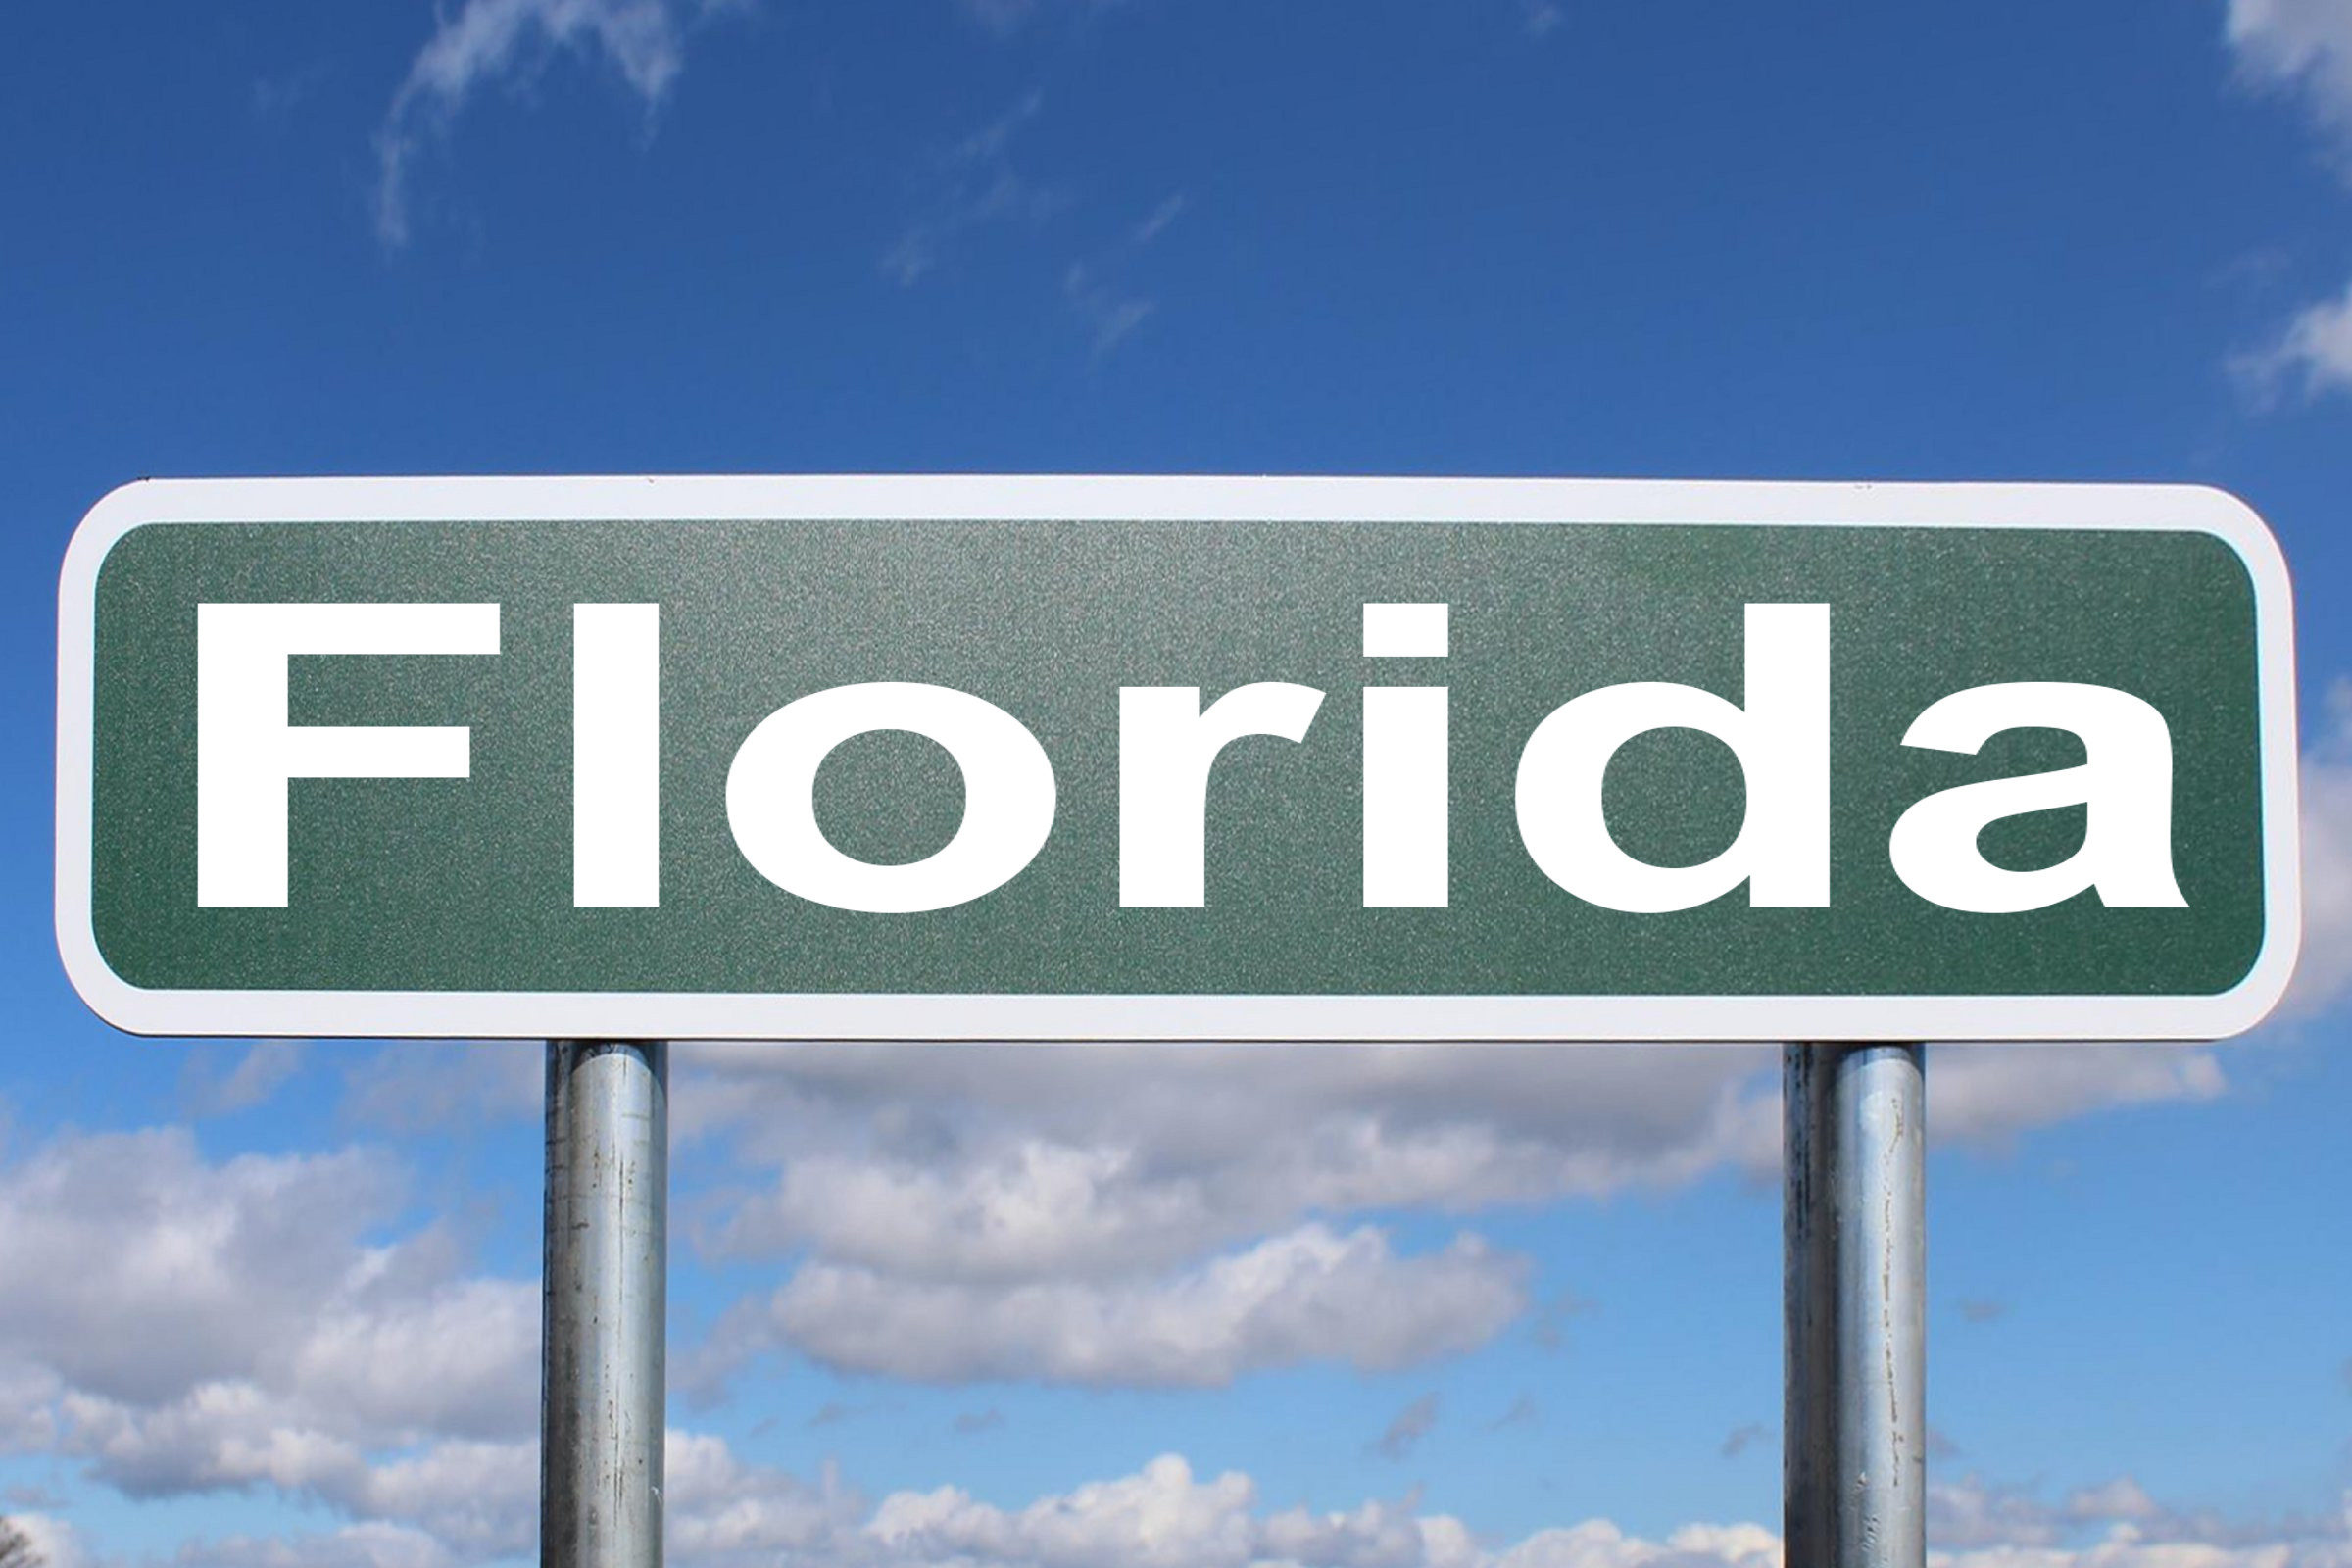 Florida Sign by Nick Youngson CCLicense